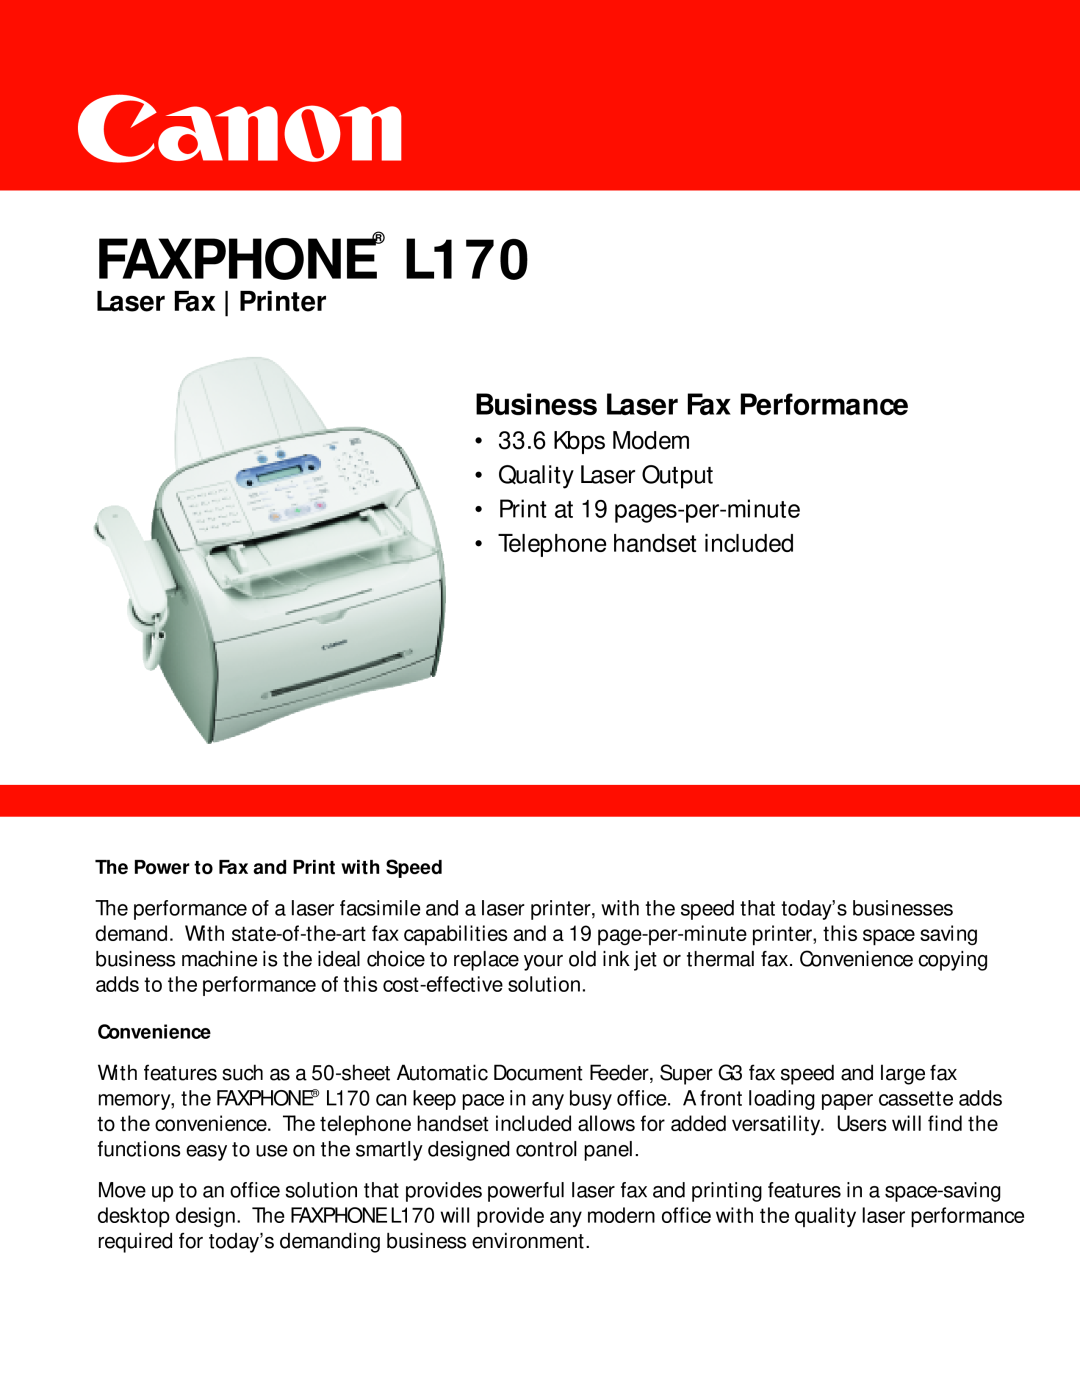 Canon manual The Power to Fax and Print with Speed, Convenience, FAXPHONE L170, Business Laser Fax Performance 